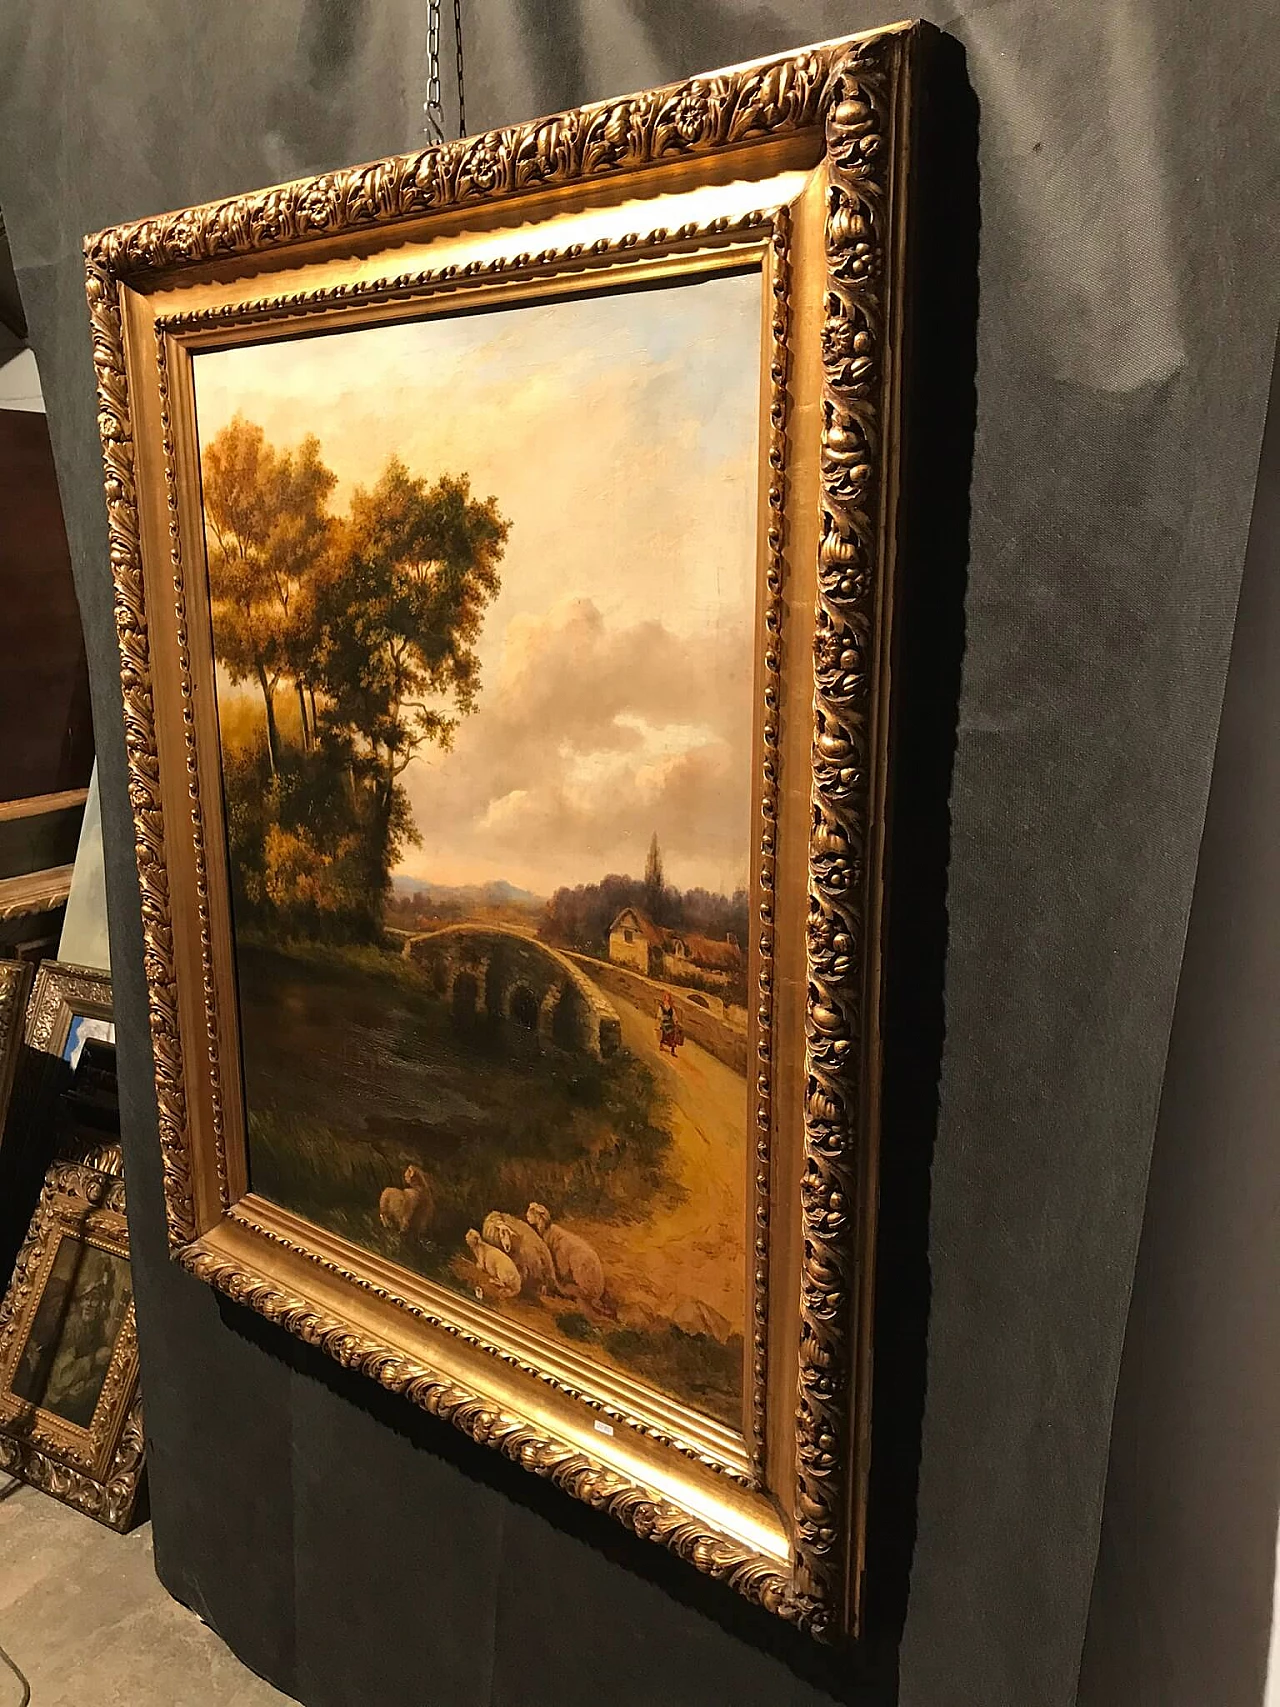 Oil painting on canvas with bucolic landscape, '800 1175910